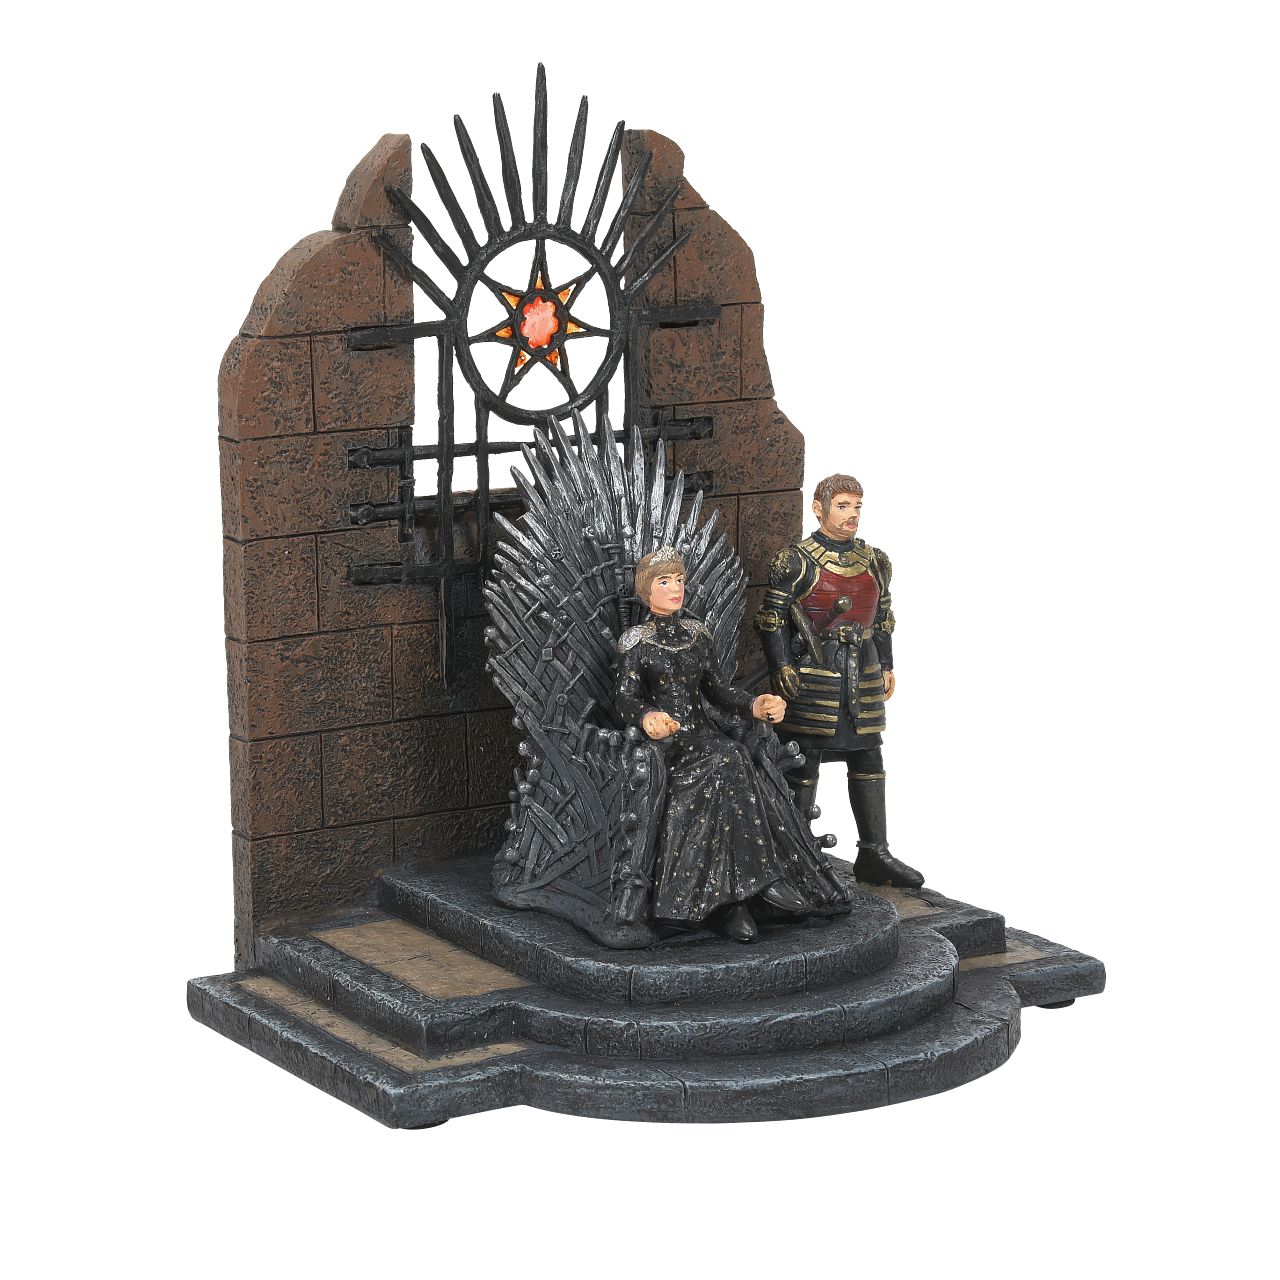 D56 Cersei and Jamie Lannister Figurine - Game of Thrones  Featuring Queen Cersei and Sir Jamie Lannister this piece has been hand crafted from the highest quality cast stone and hand painted. Each piece comes in a branded gift box. This is a decoration, not a toy.